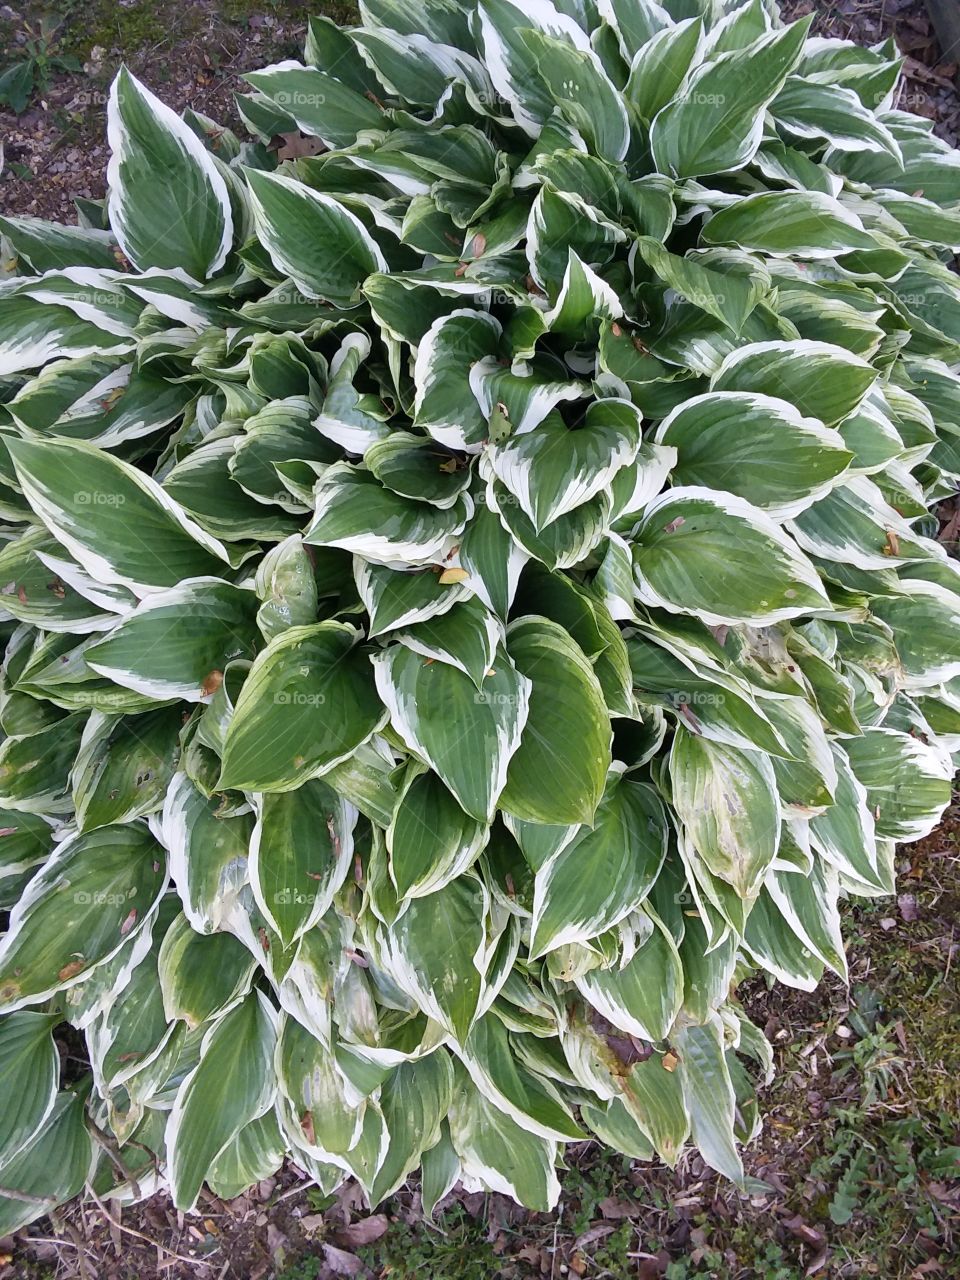 Hostas make a great accent to a flower garden with just the 2 tone green leaves